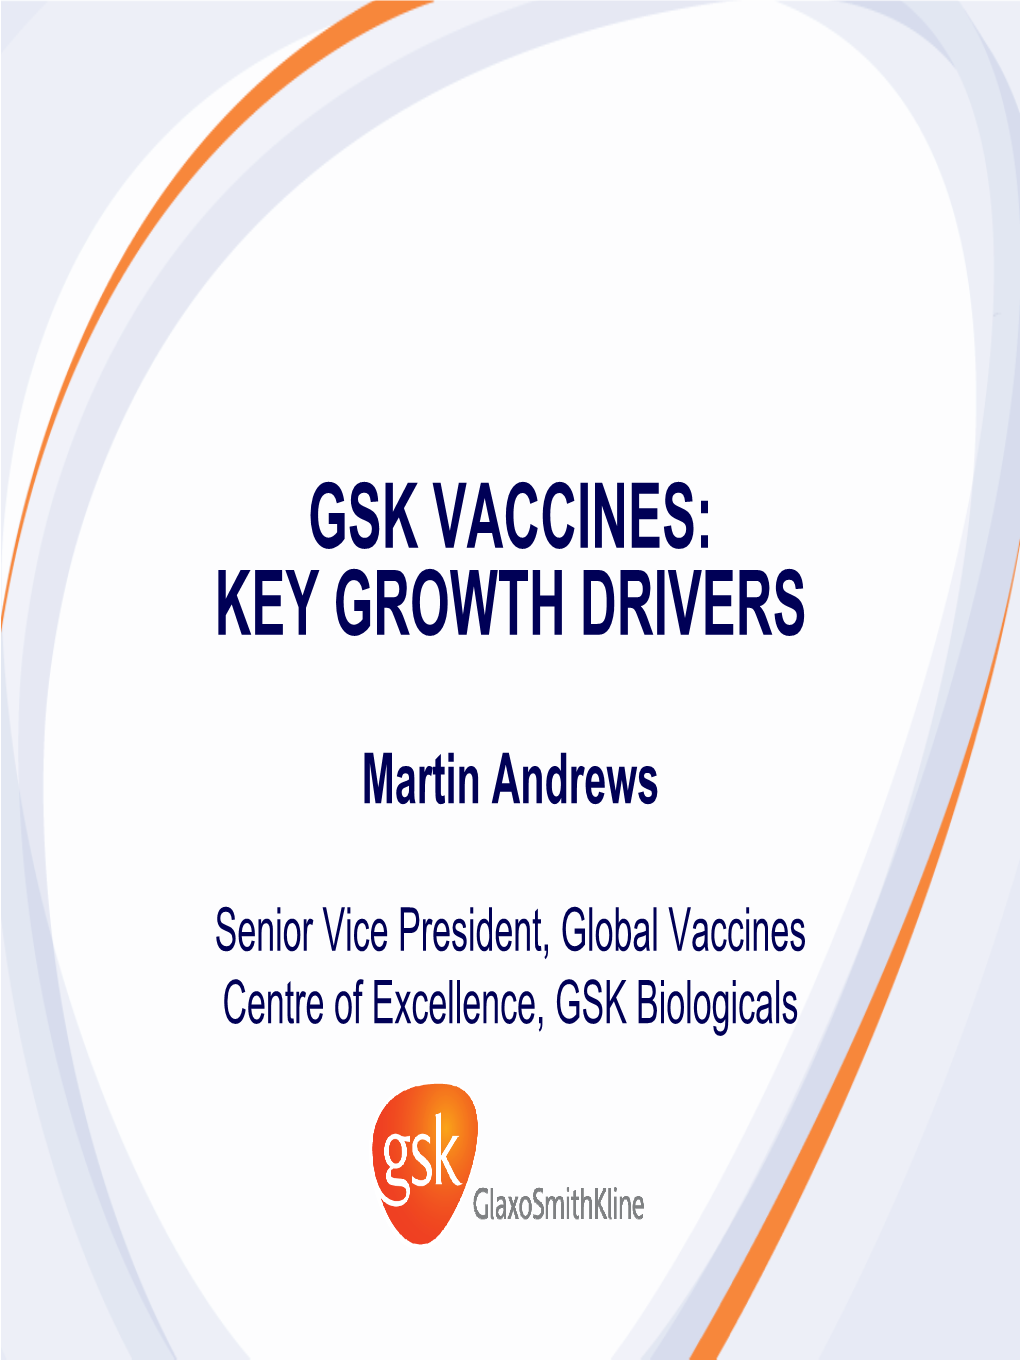 Gsk Vaccines: Key Growth Drivers